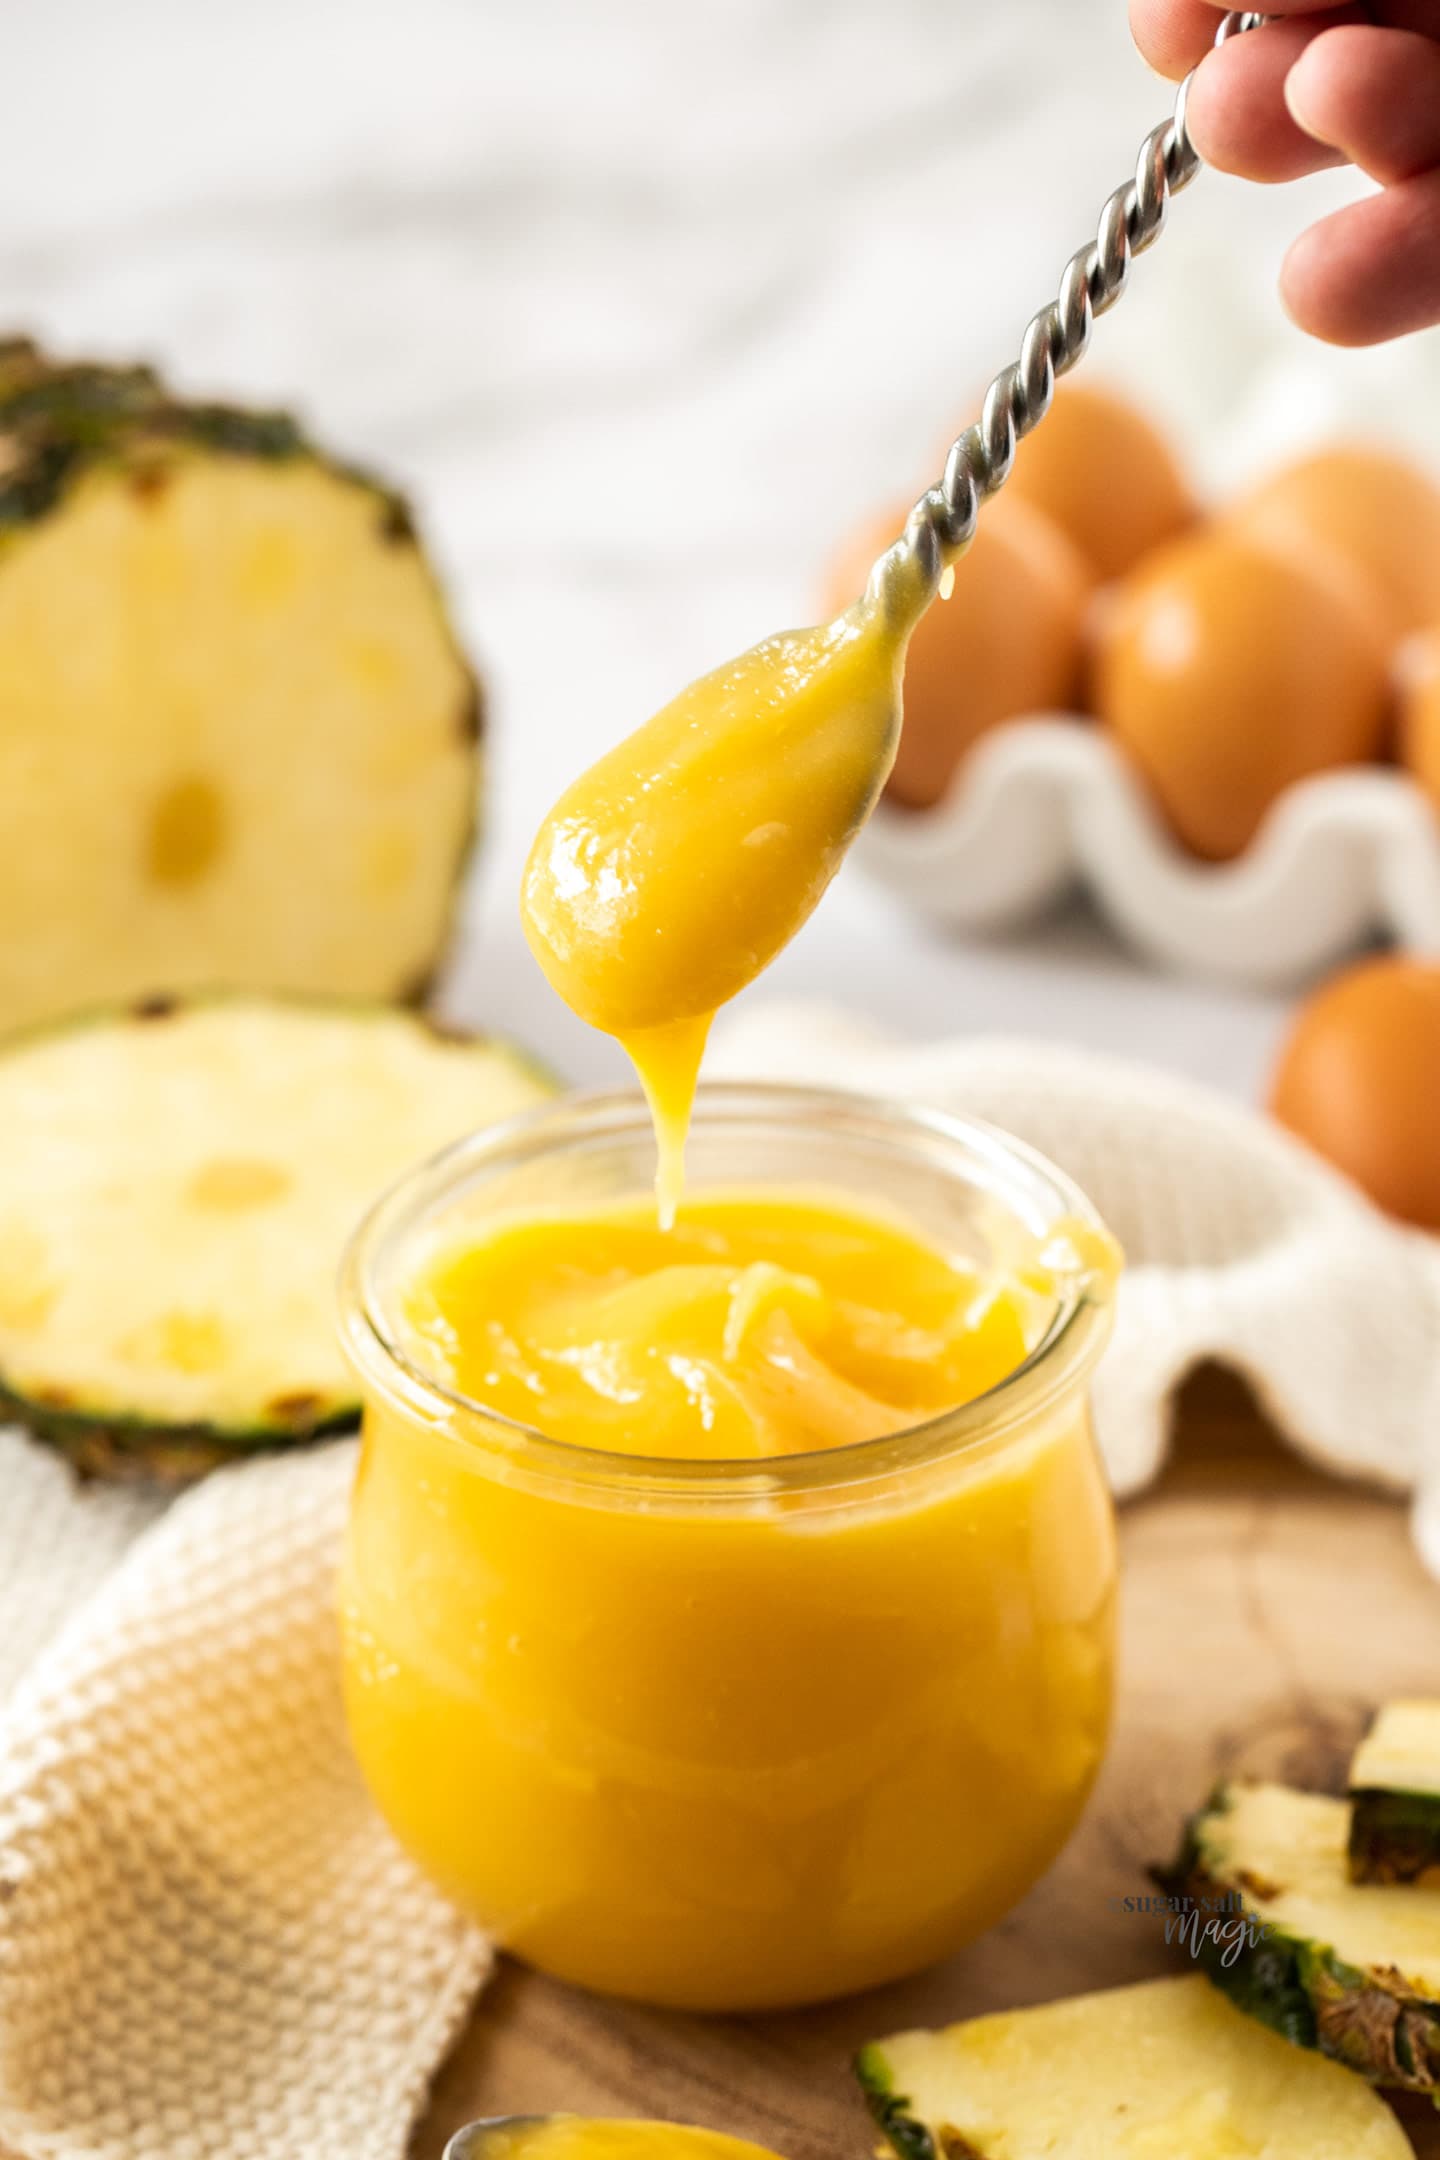 A spoon taking pineapple curd from a glass jar